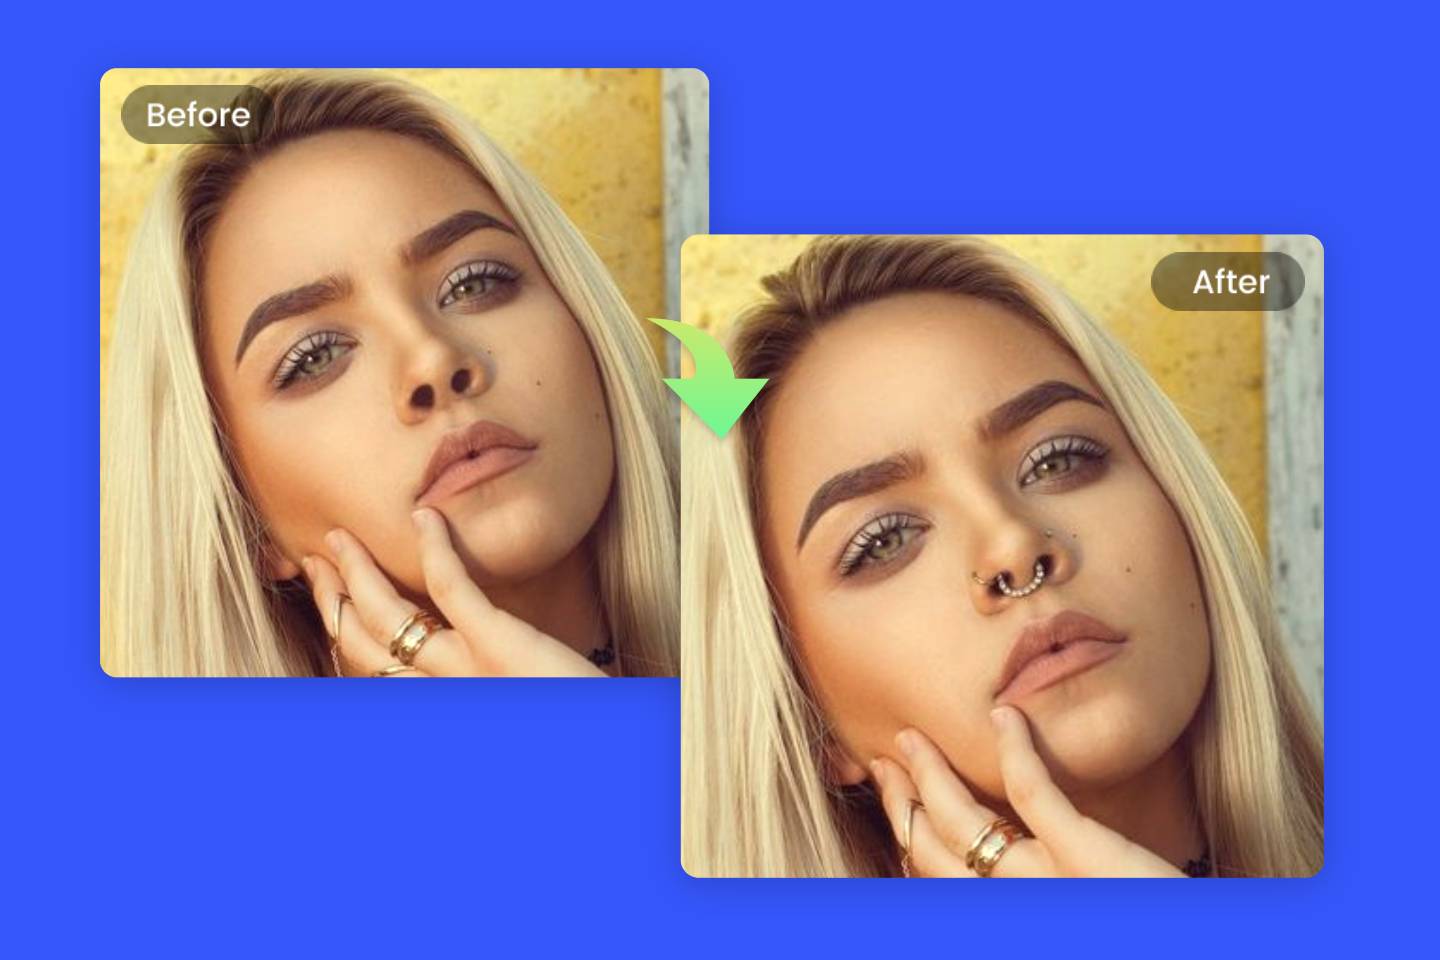 Buy fashion accessories Nosering Golden, Black, Silver Plated Nose Ring for  Women & Girls 3PCS. + Free 1 Nosering Online at Low Prices in India -  Amazon.in